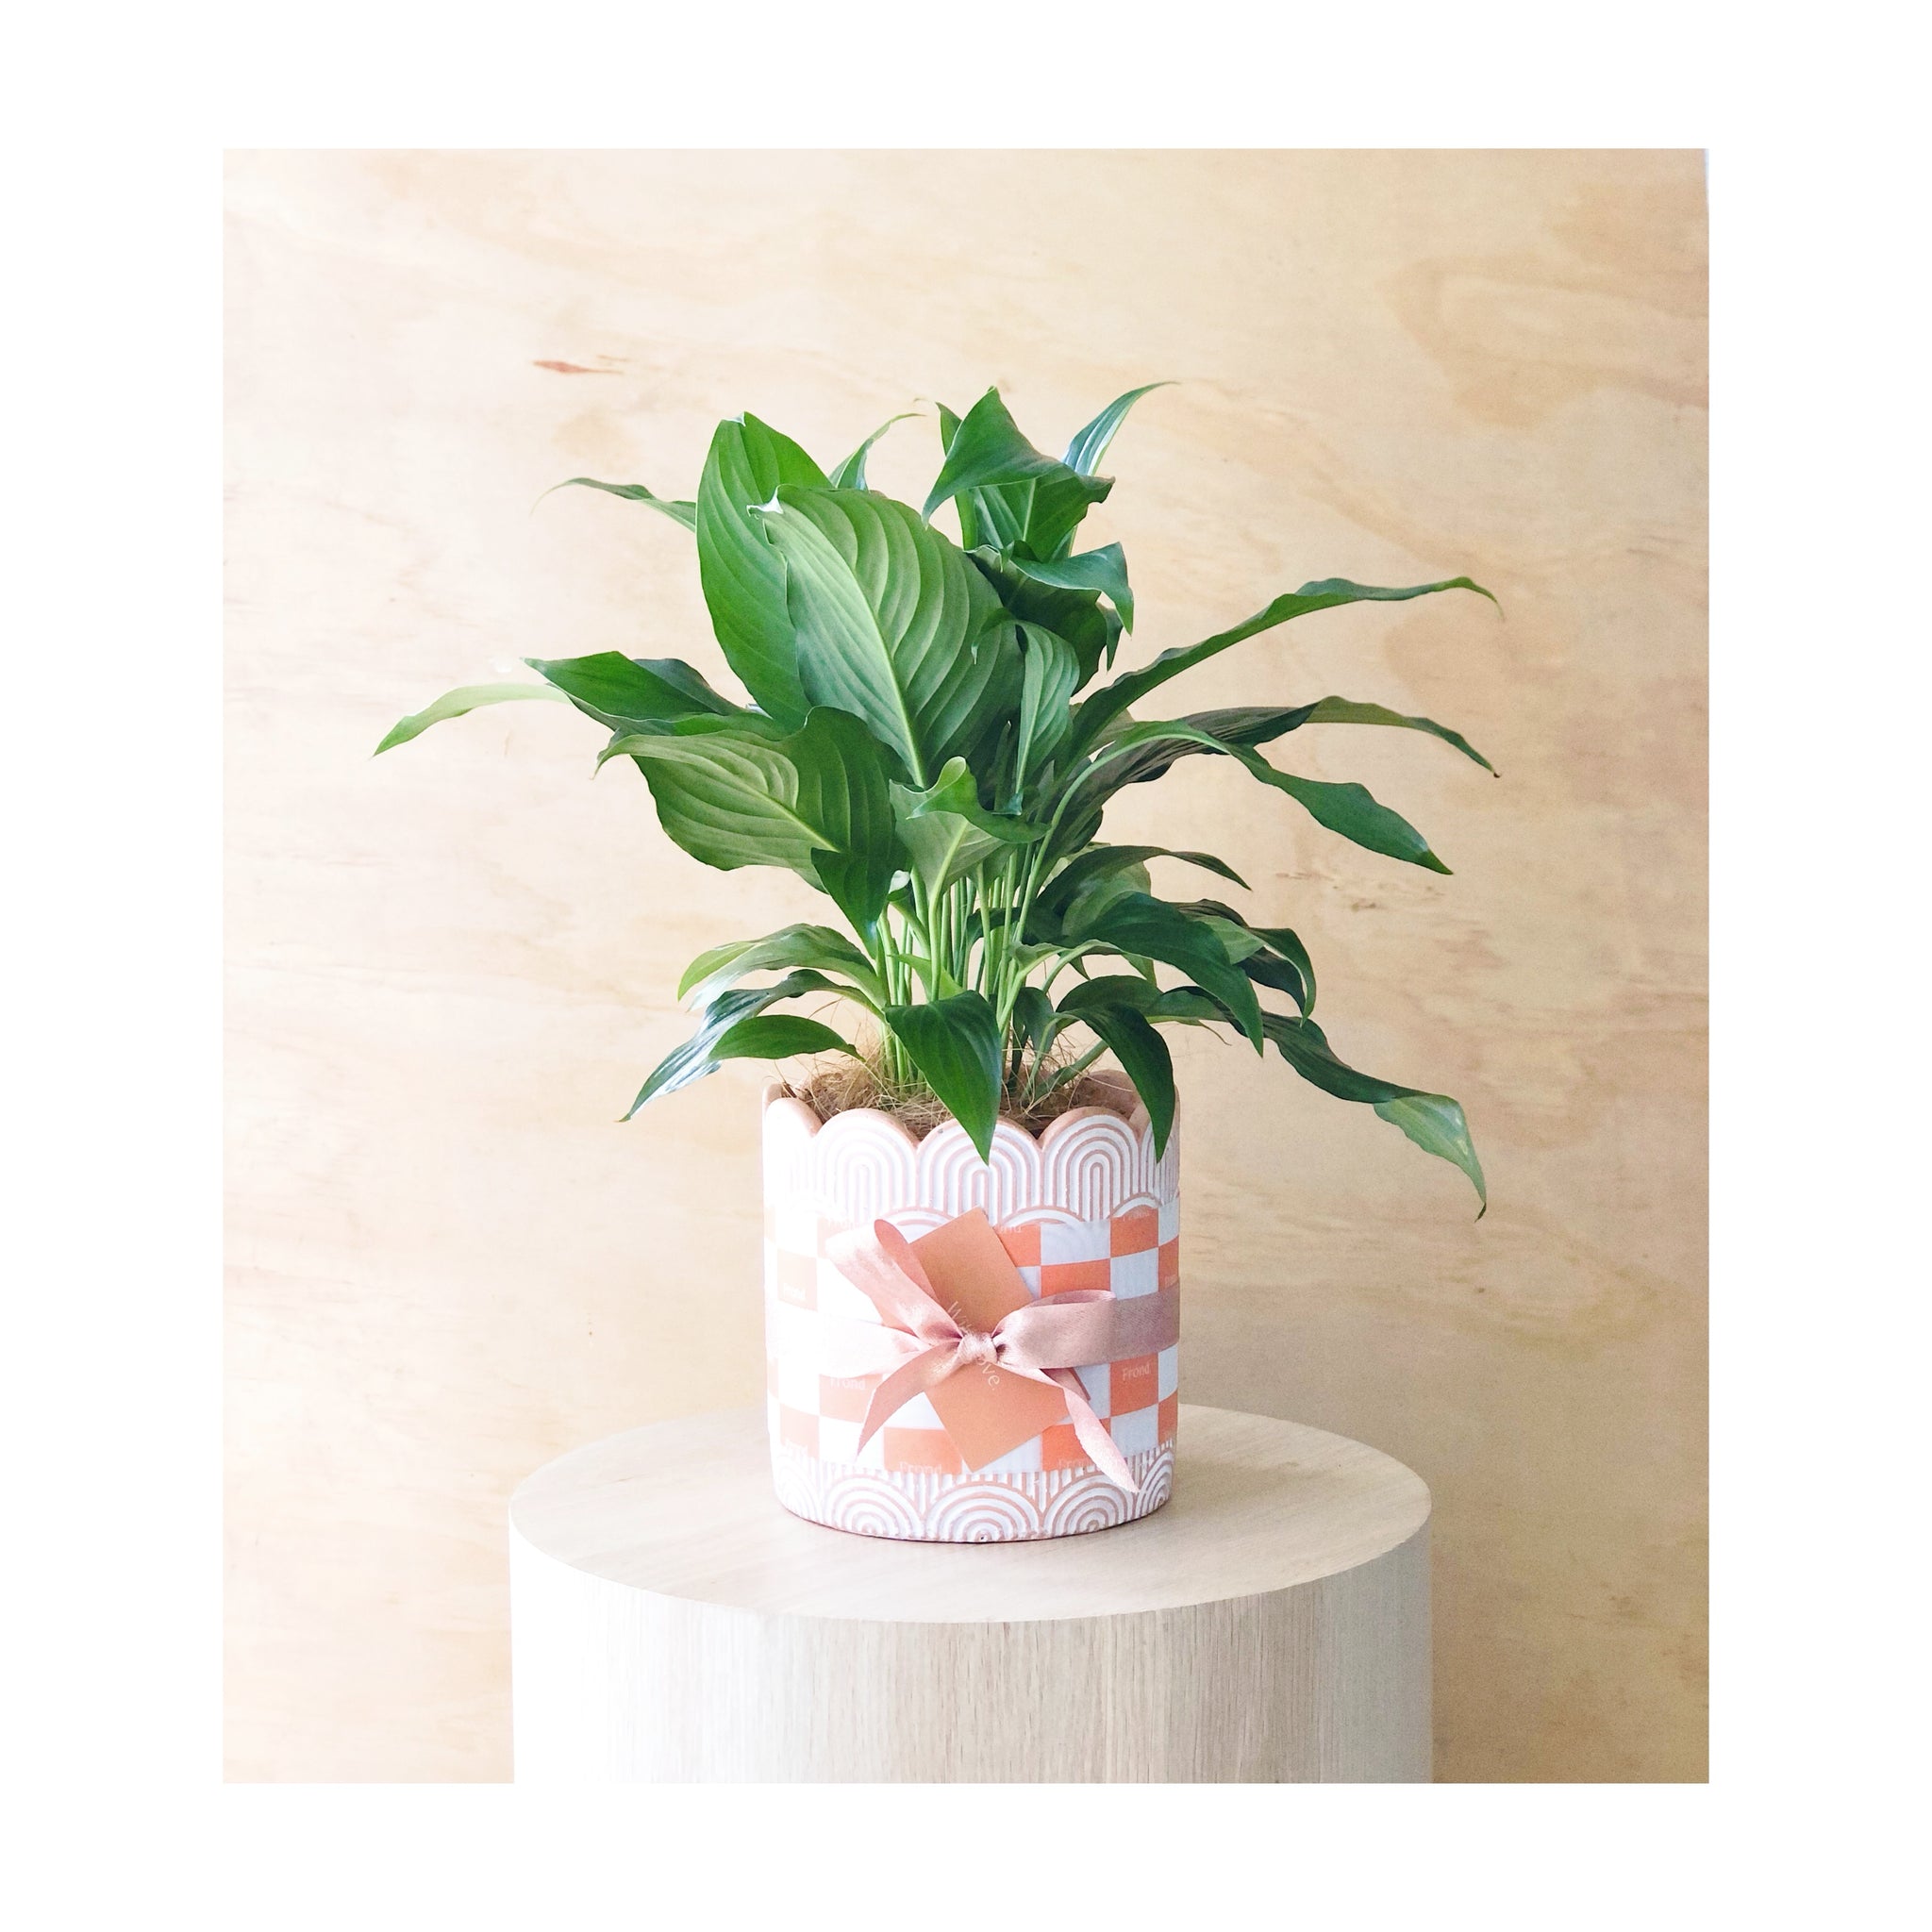 Peace Lily Plant & Pot Gift | Peace Lily (Spathiphyllum) Indoor Plant + Arco Cement Plant Pot + Plant Gift Wrapping + Handwritten Card